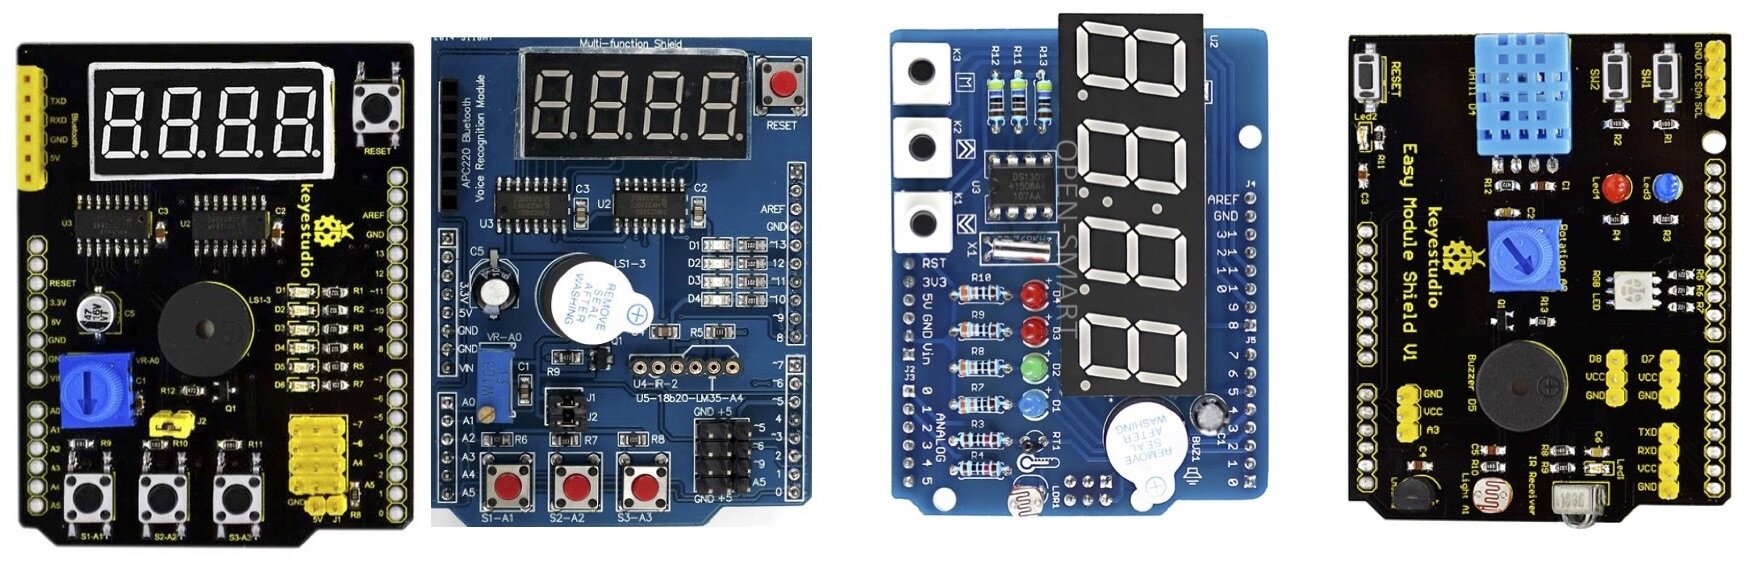 DAOKI 2Pcs Multi-Function Shield Multifunctional Expansion Board Module with Buzzer LM35 4LED with Four Digital Display for Arduino UNO R3 Lenardo Mega2560